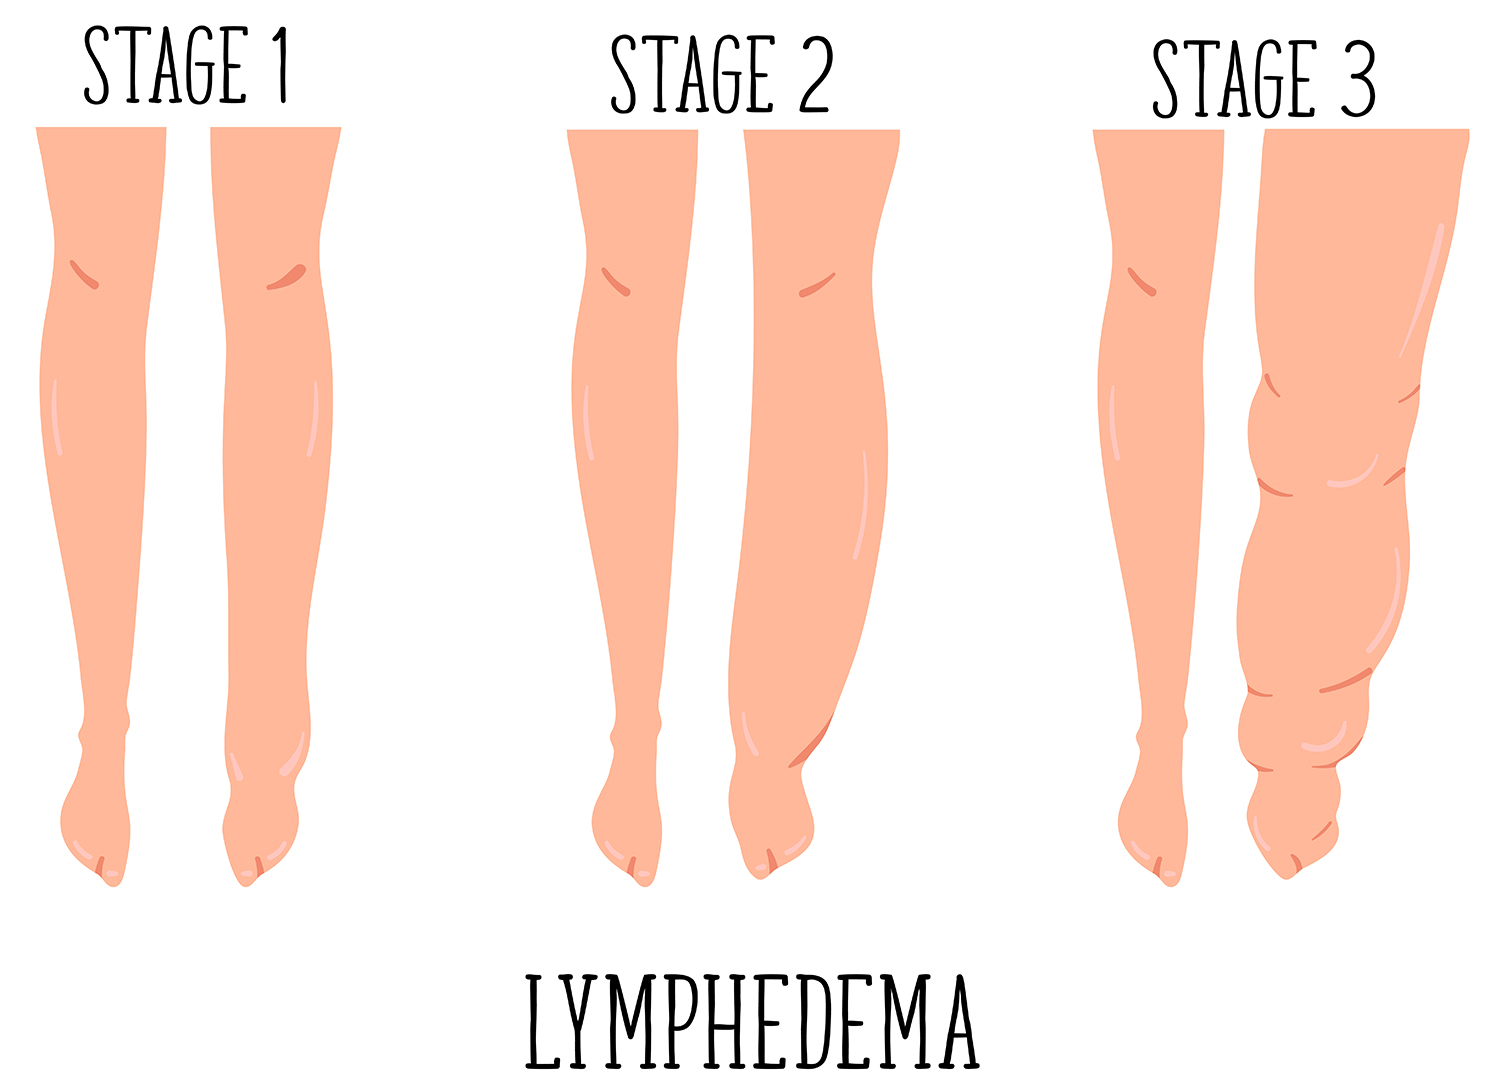 Three Stages of Lymphedema